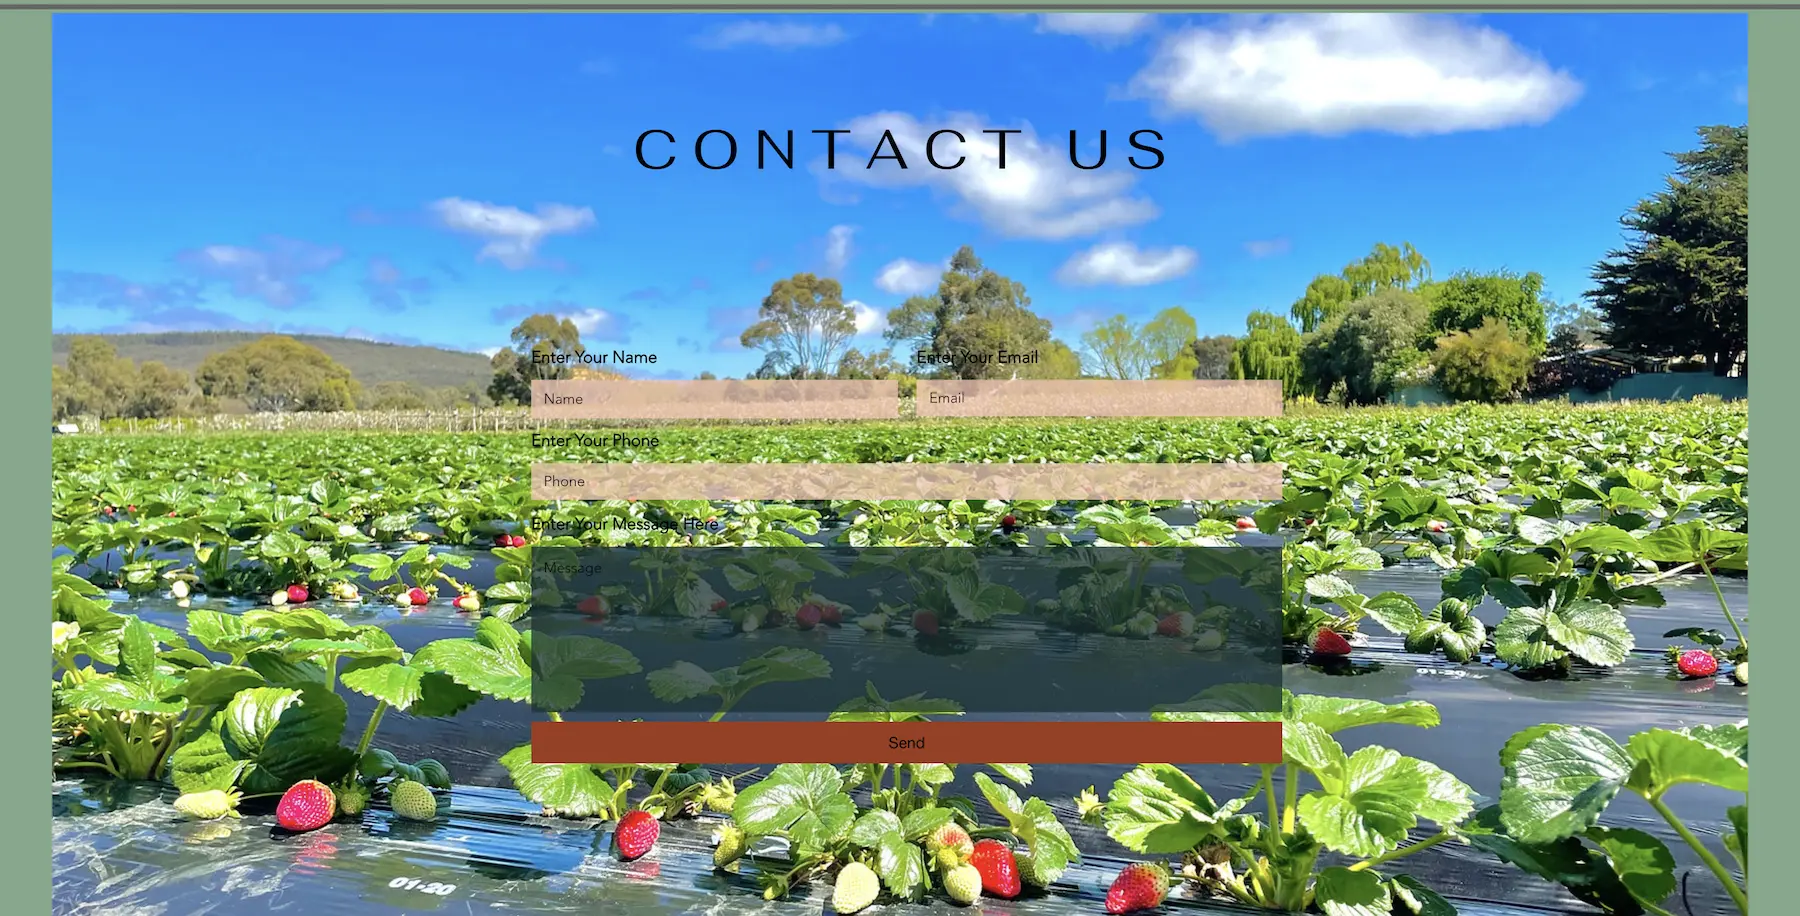 The website contact us from the original Harvest the Fleurieu website created by Allis with Wix.